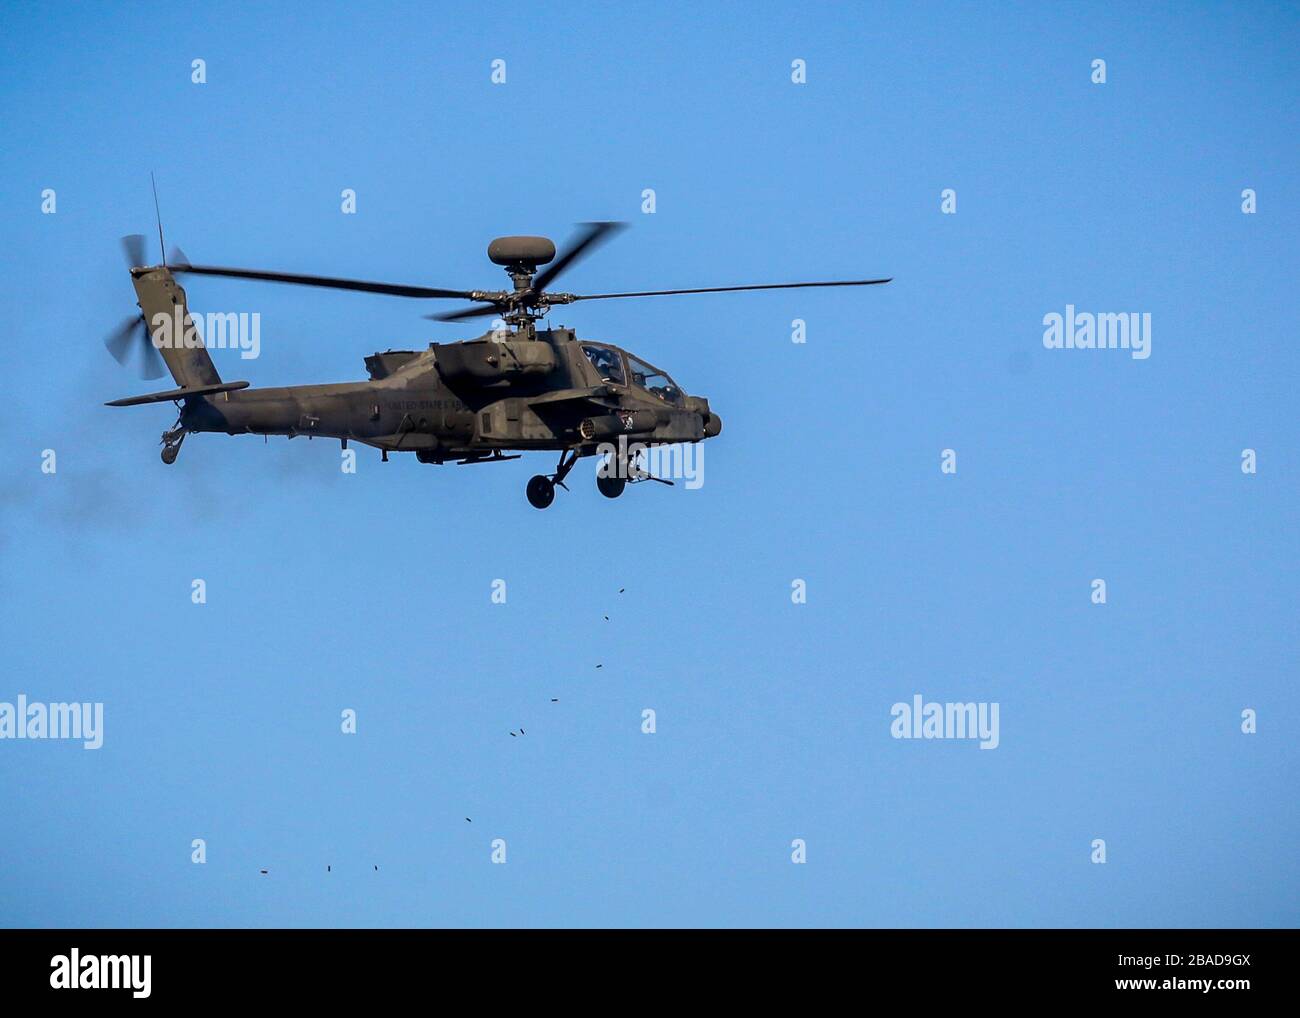 3rd Combat Aviation Brigade fly apache helicopters during table 8 gunnery to improve lethality of aerial weapons teams and platoon maneuvers, Mar. 25, 2020. Stock Photo